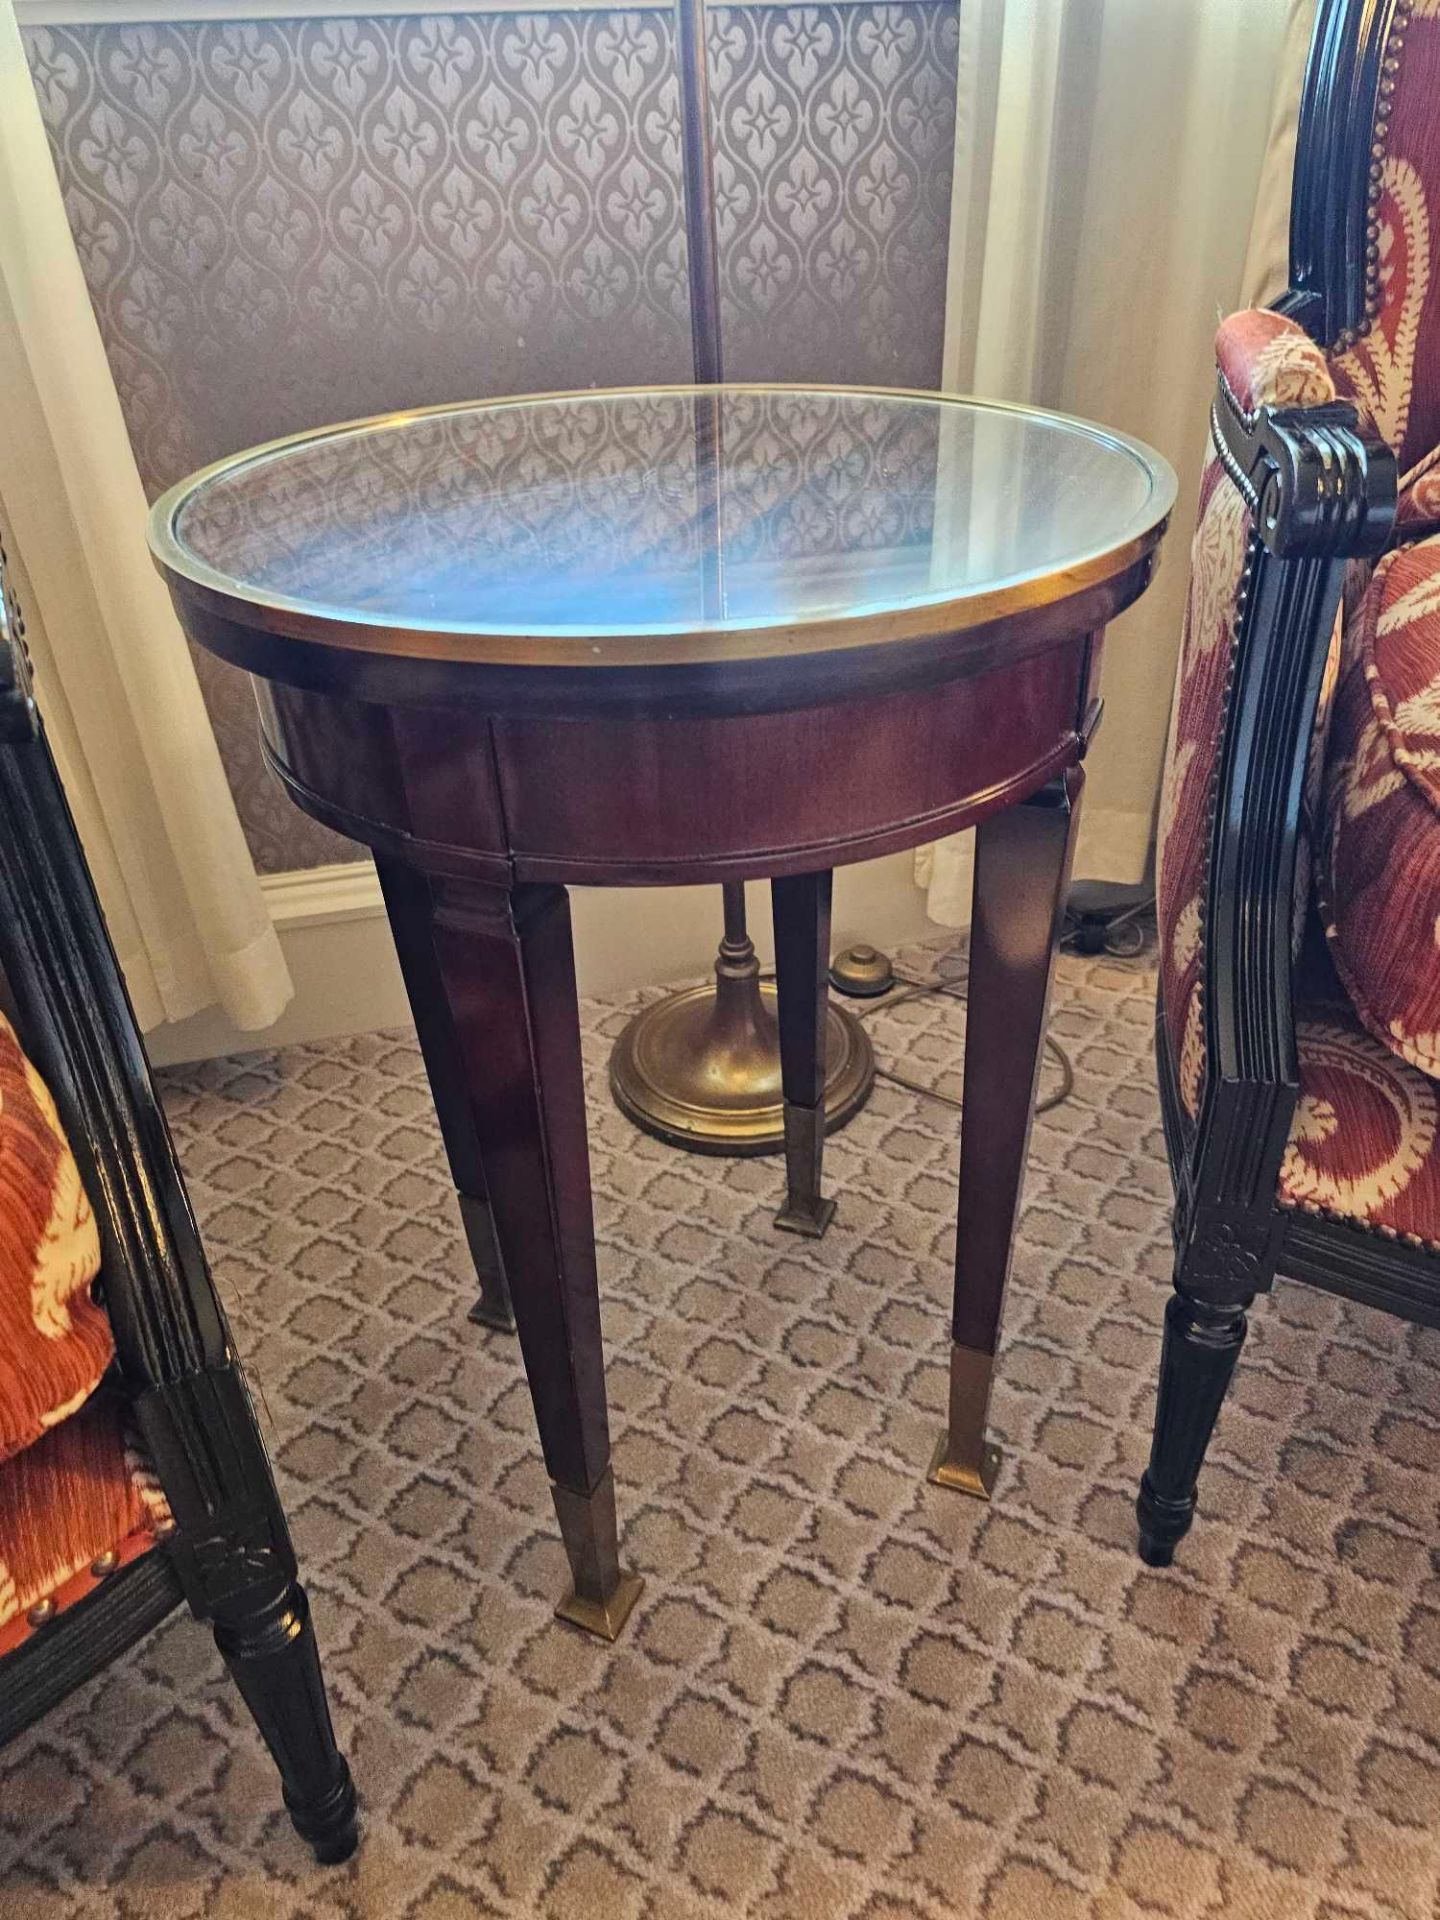 Circular Side Table With Antiqued Plate Top And Brass Trim Mounted On Tapering Legs With Brass - Image 2 of 4